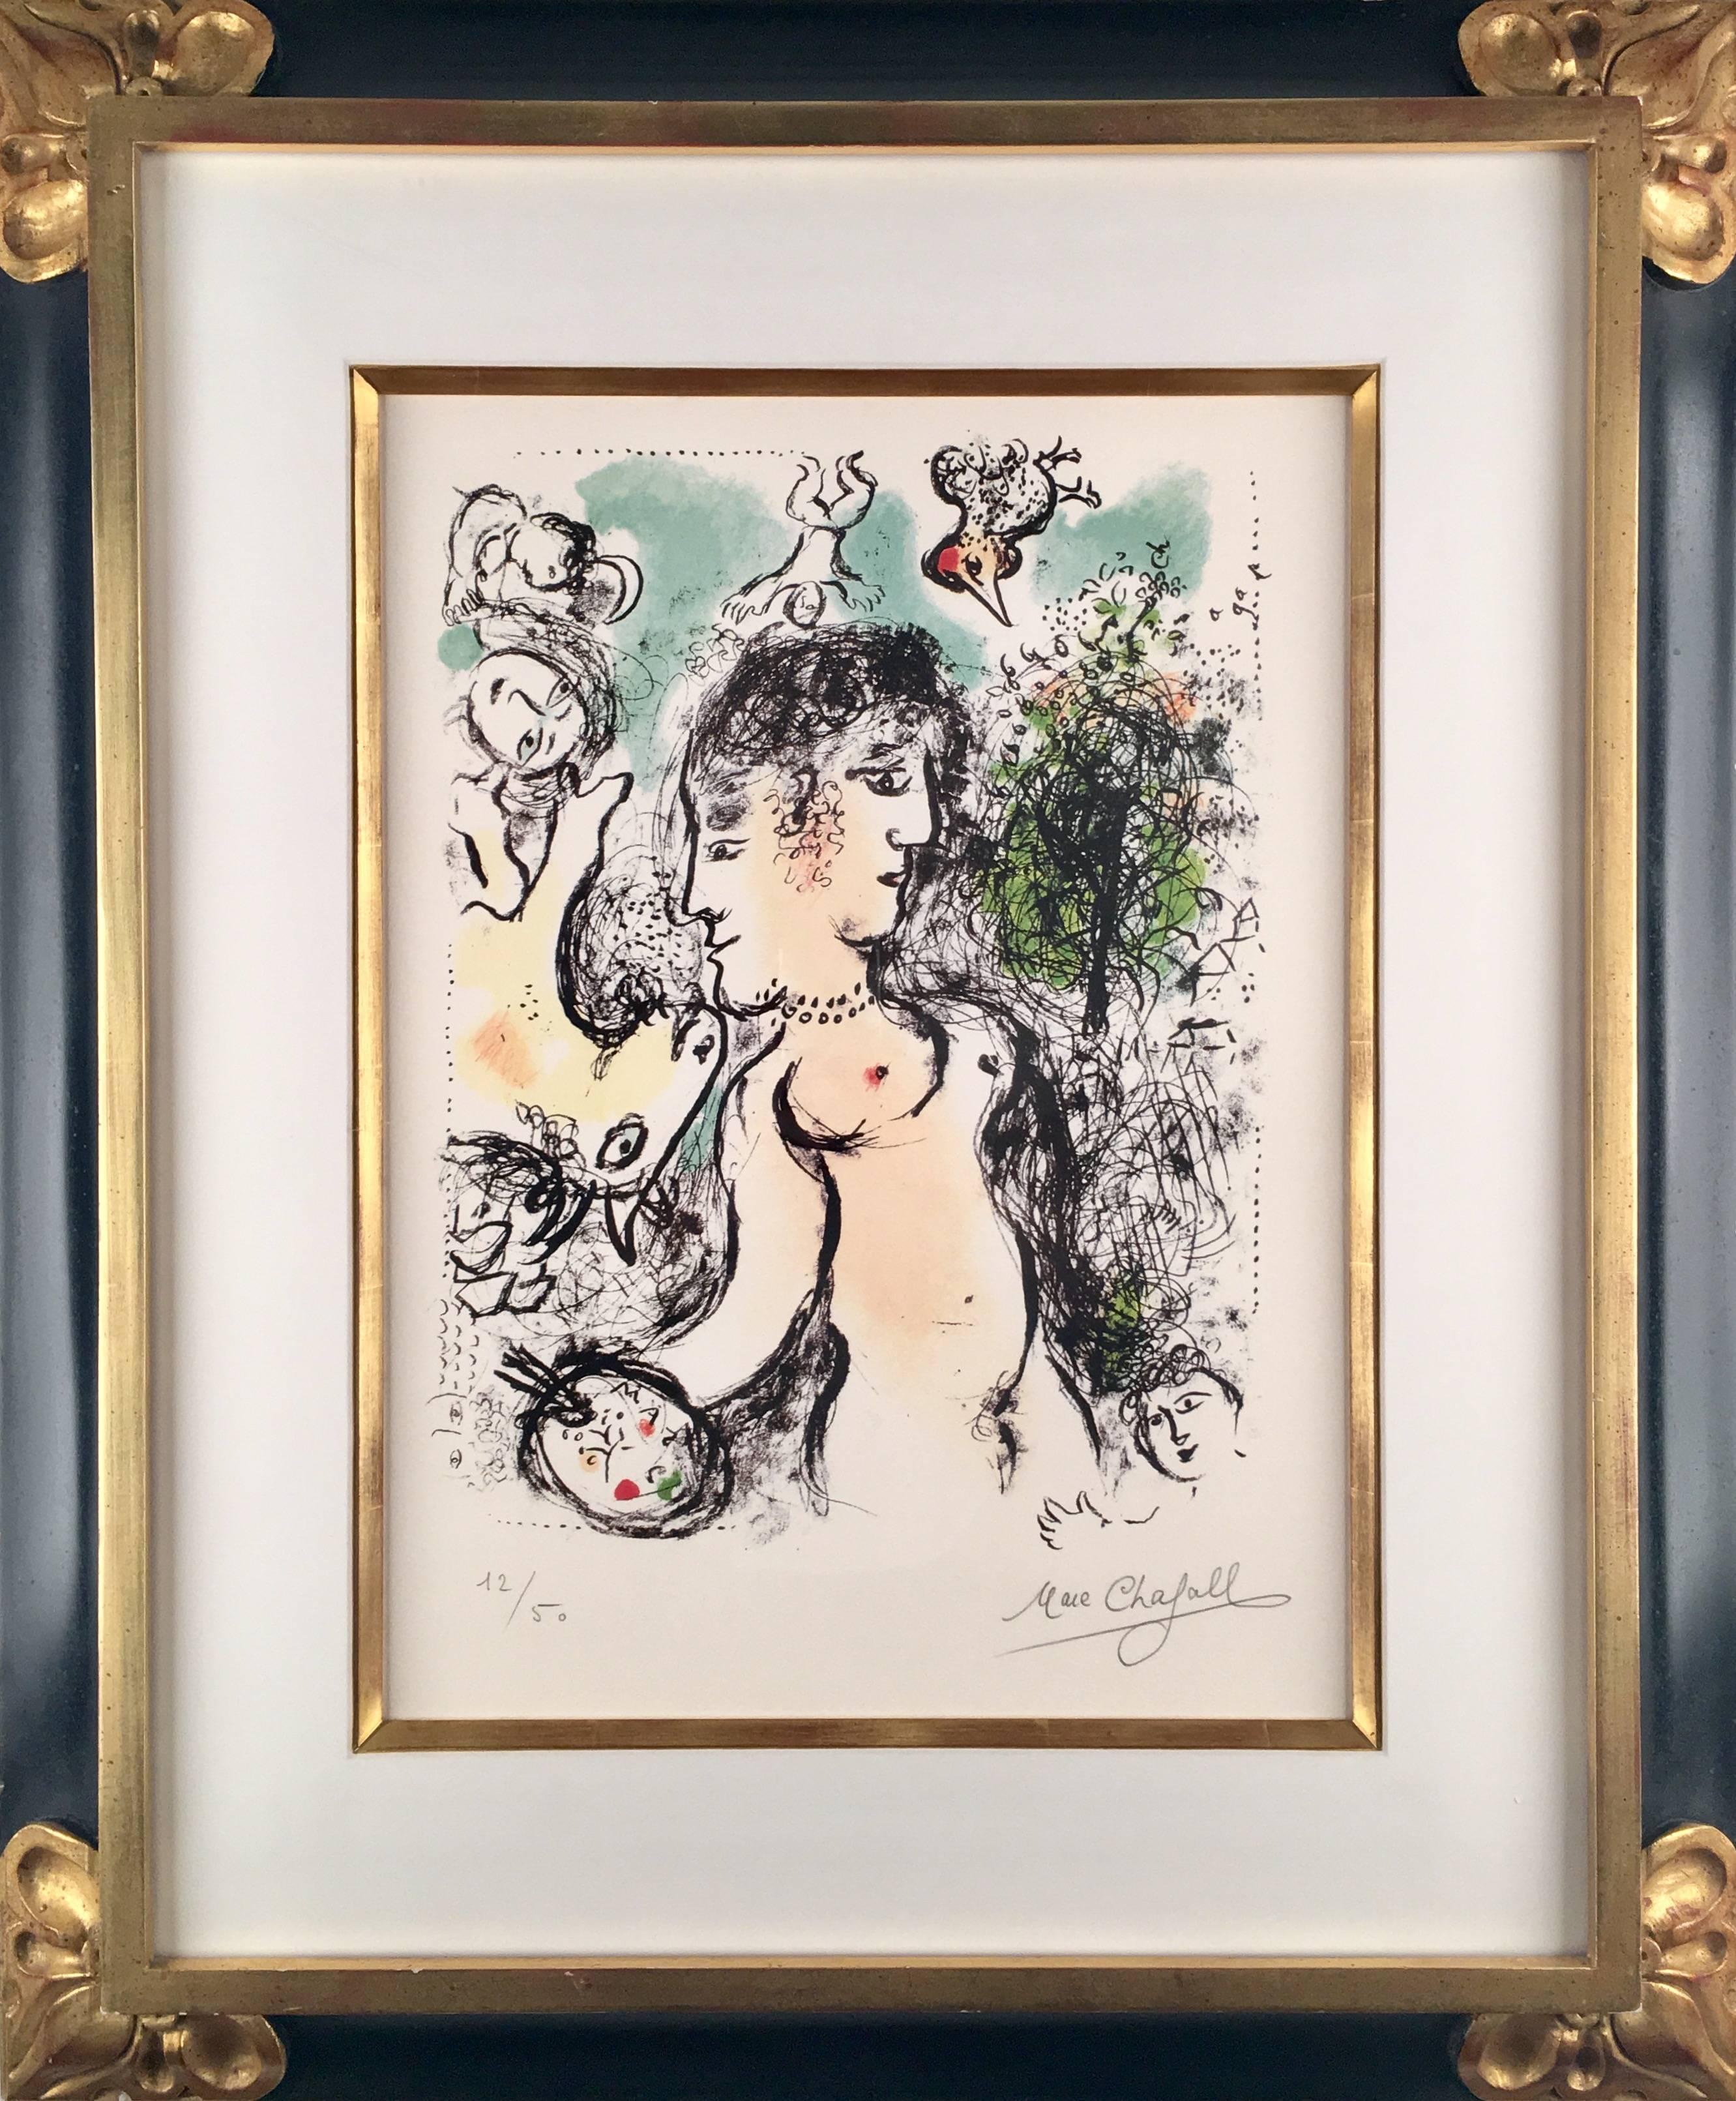 This piece is an original lithograph by Marc Chagall, created in November of 1983.  It is hand signed and numbered from the edition of 50 on Arches wove paper, plus 12 black artist proofs, numbered and signed.  The paper measures 26 x 19 inches, the